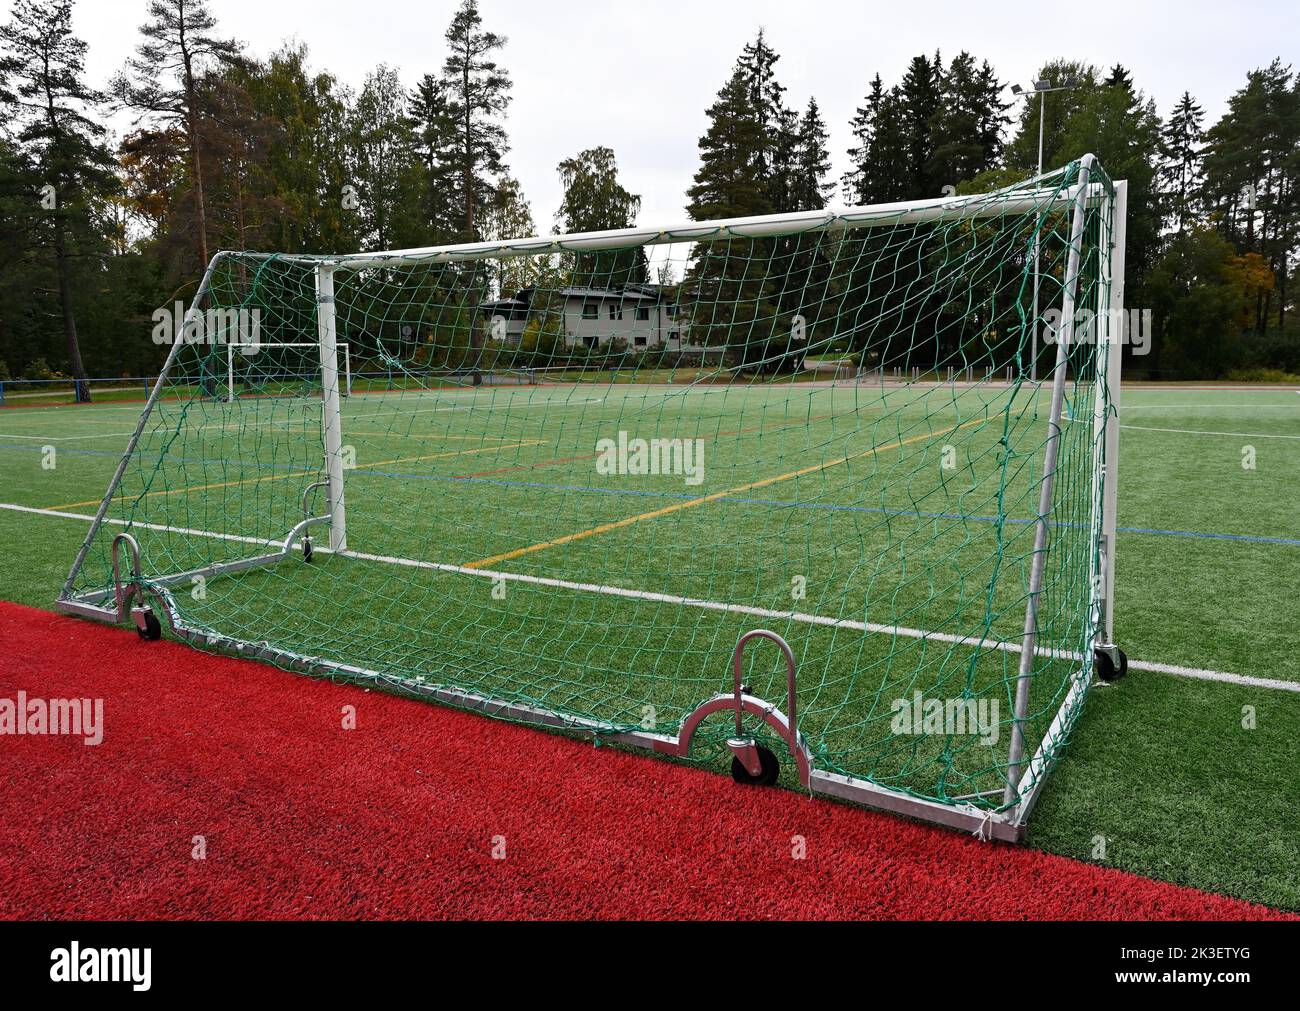 soccerl goal on wheels in a stadium with artificial turf Stock Photo